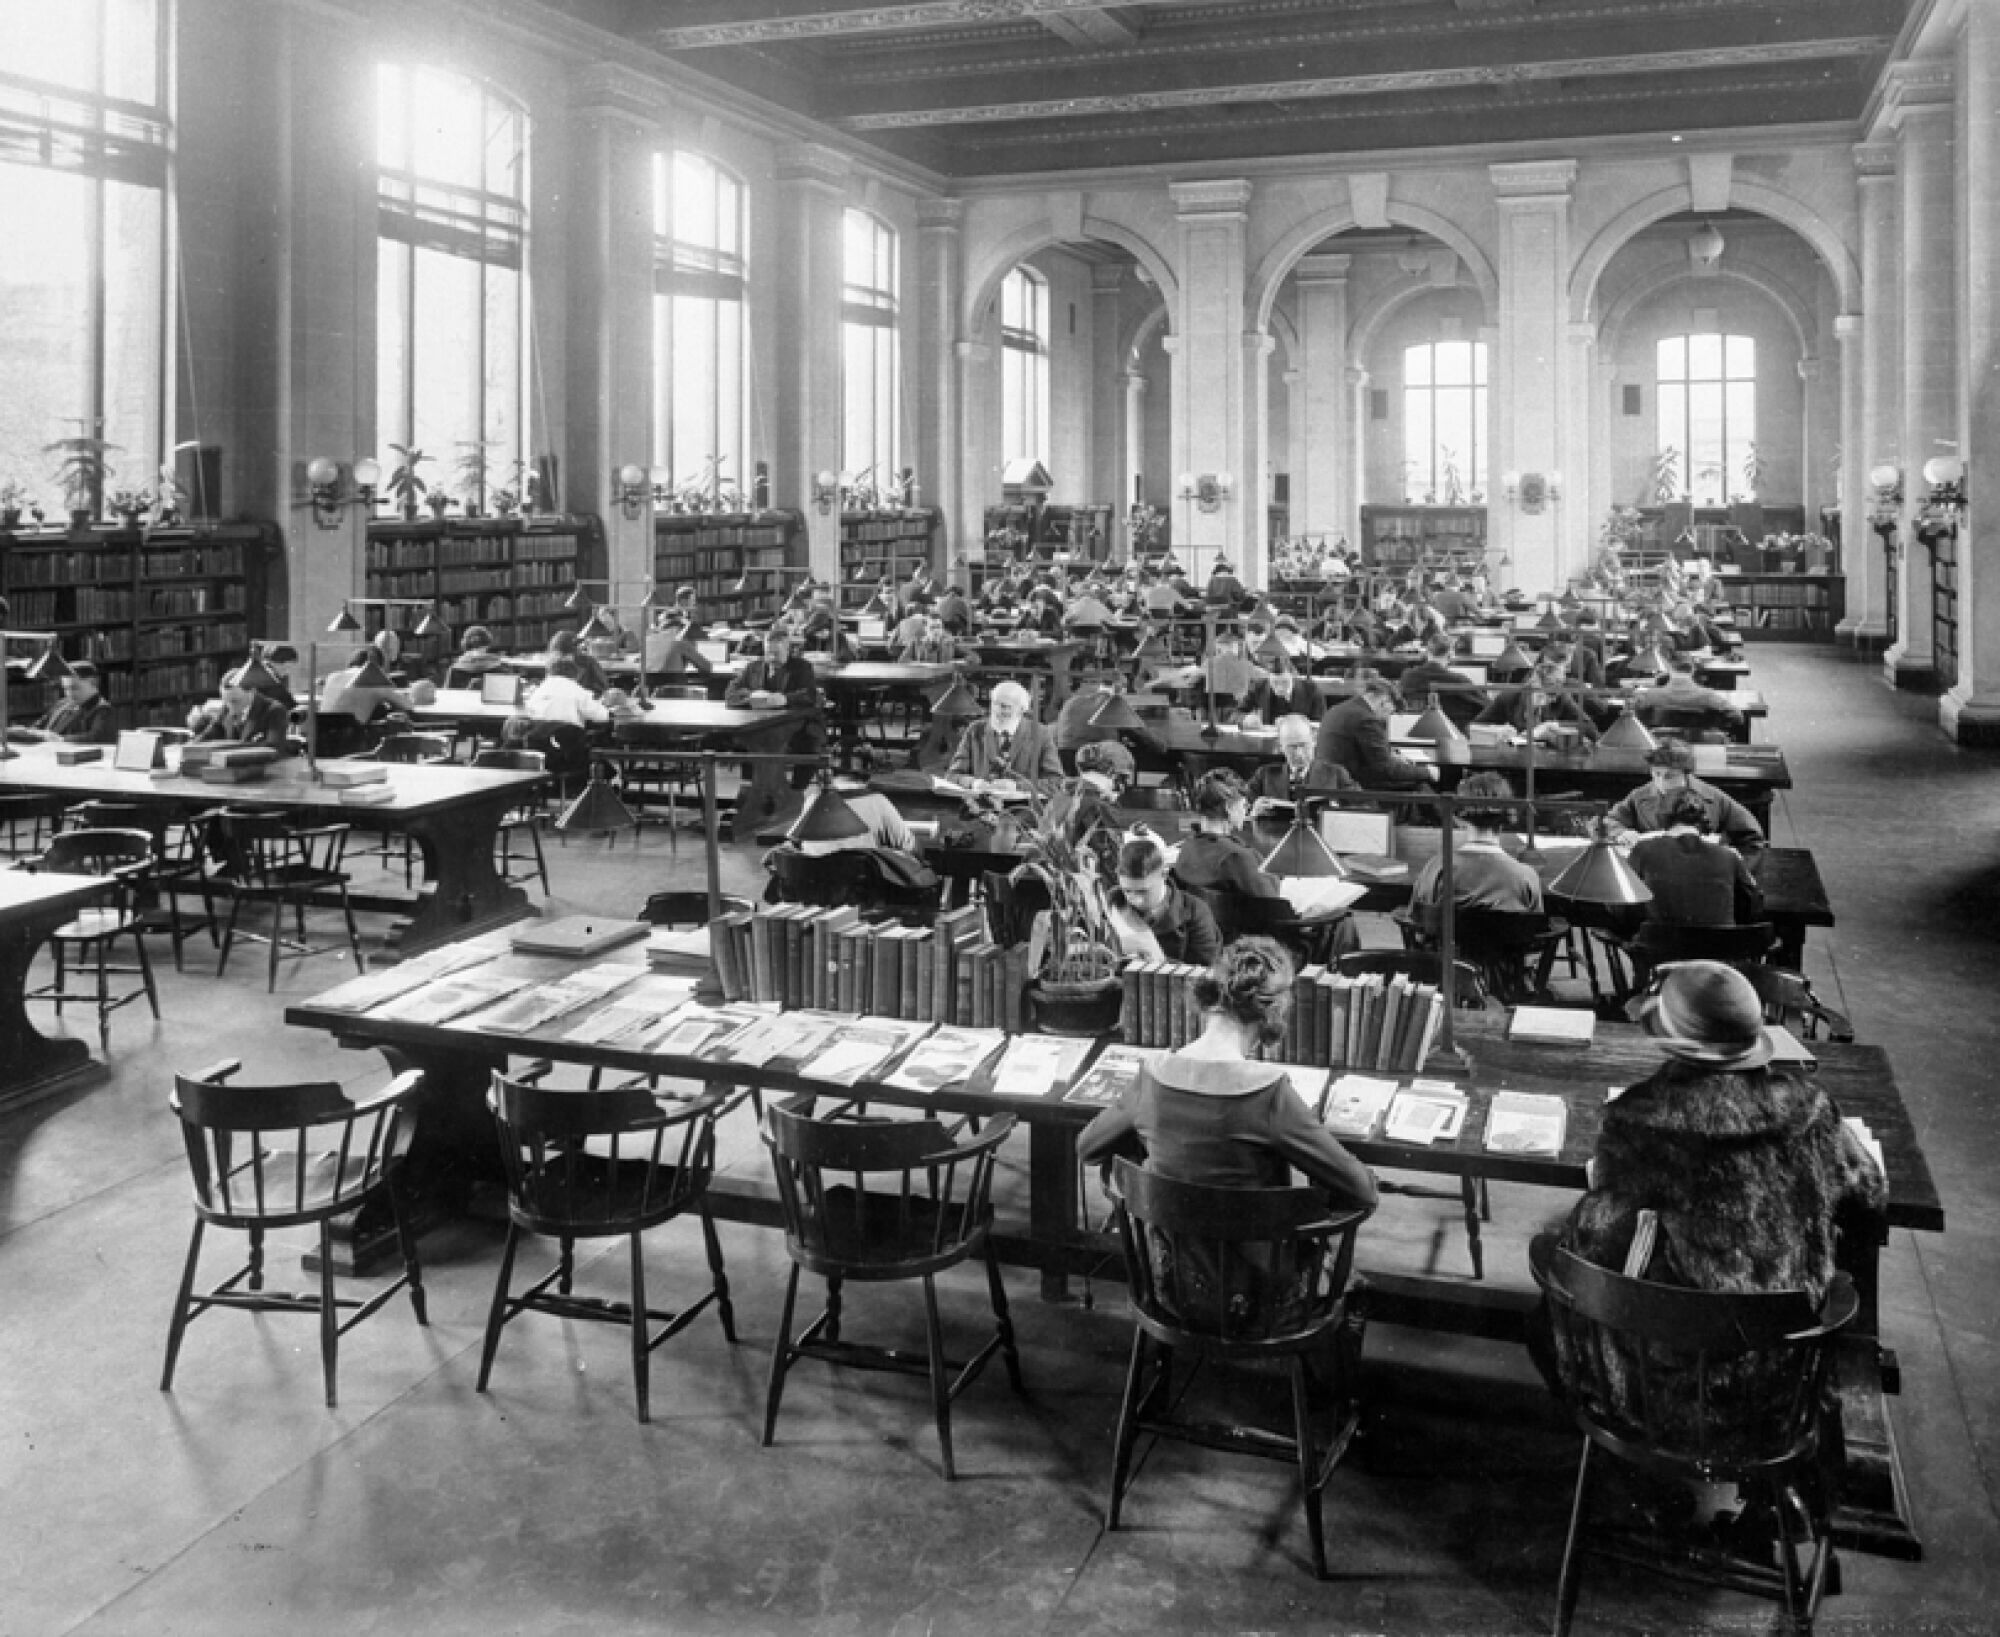 An archival photo shows people in a large room with high ceilings supported by tall arches and columns. There are wooden bookshelves lining the exterior walls while the interior has long wooden tables with people sitting and reading or examining documents.